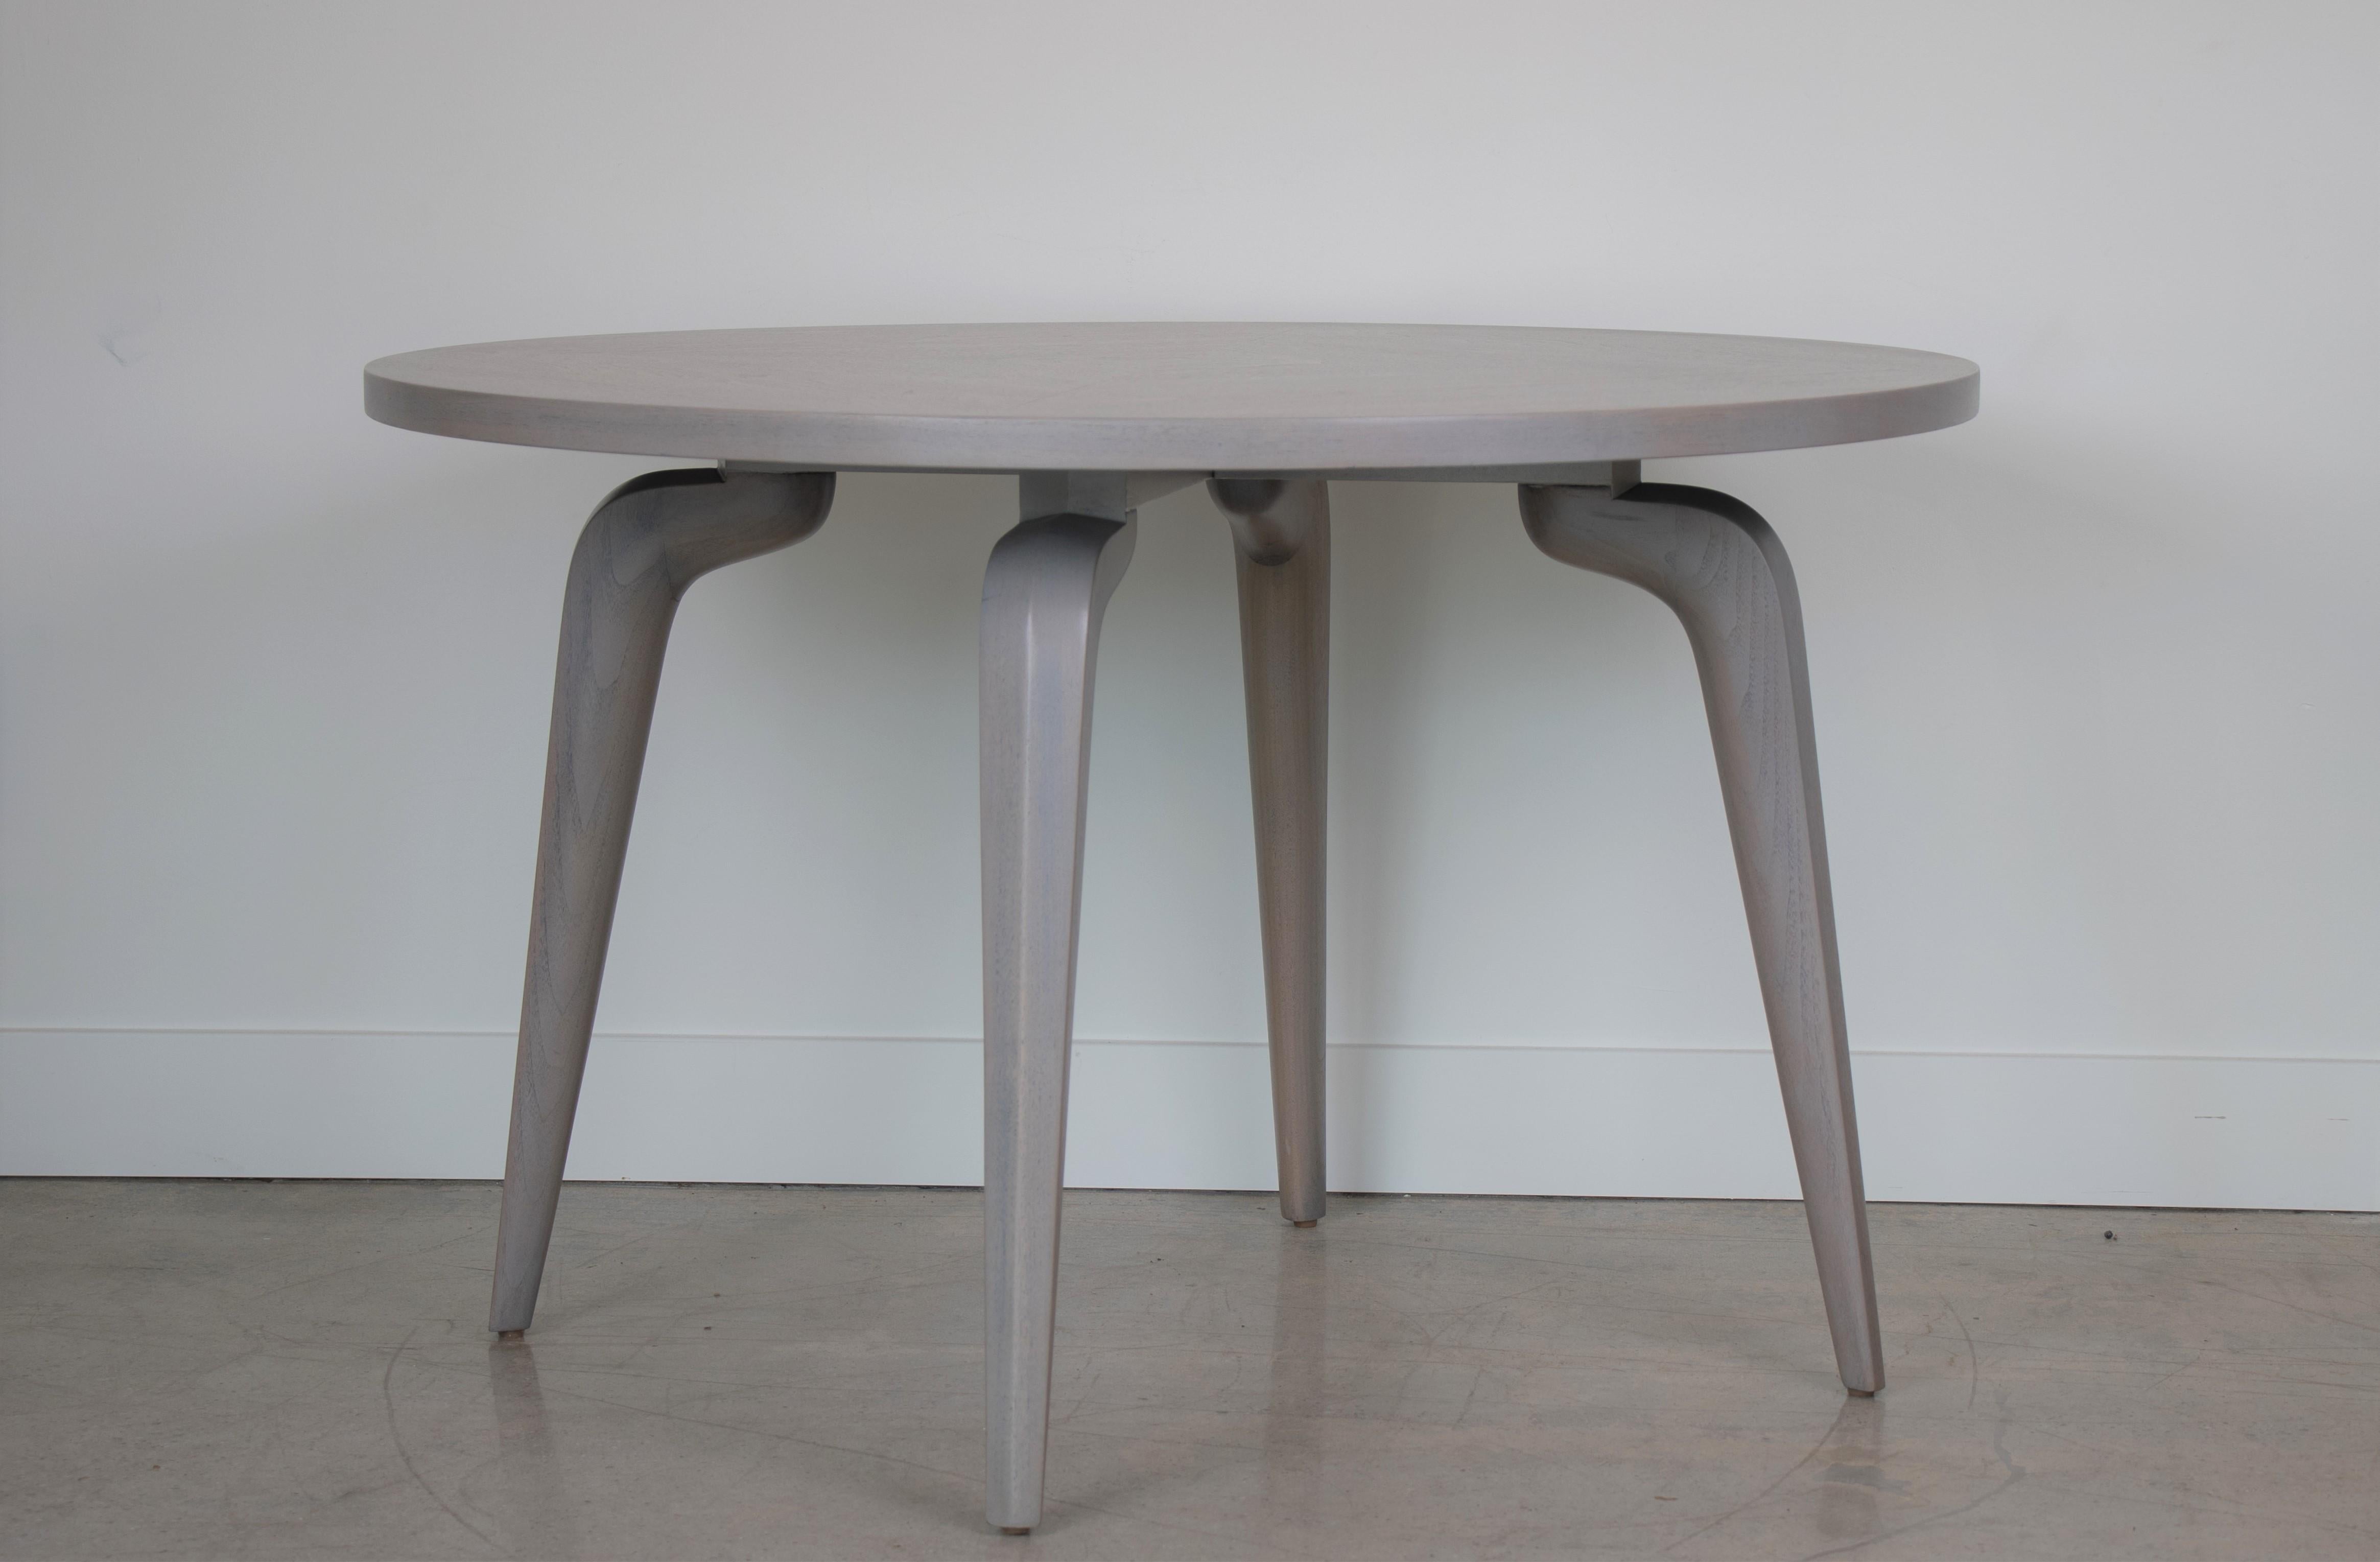 Circular wood table newly refinished in light grey-wash and sculptural legs. Designed by Maurice Bailey for Monteverdi-Young. Perfect as a dining, card, or center table.